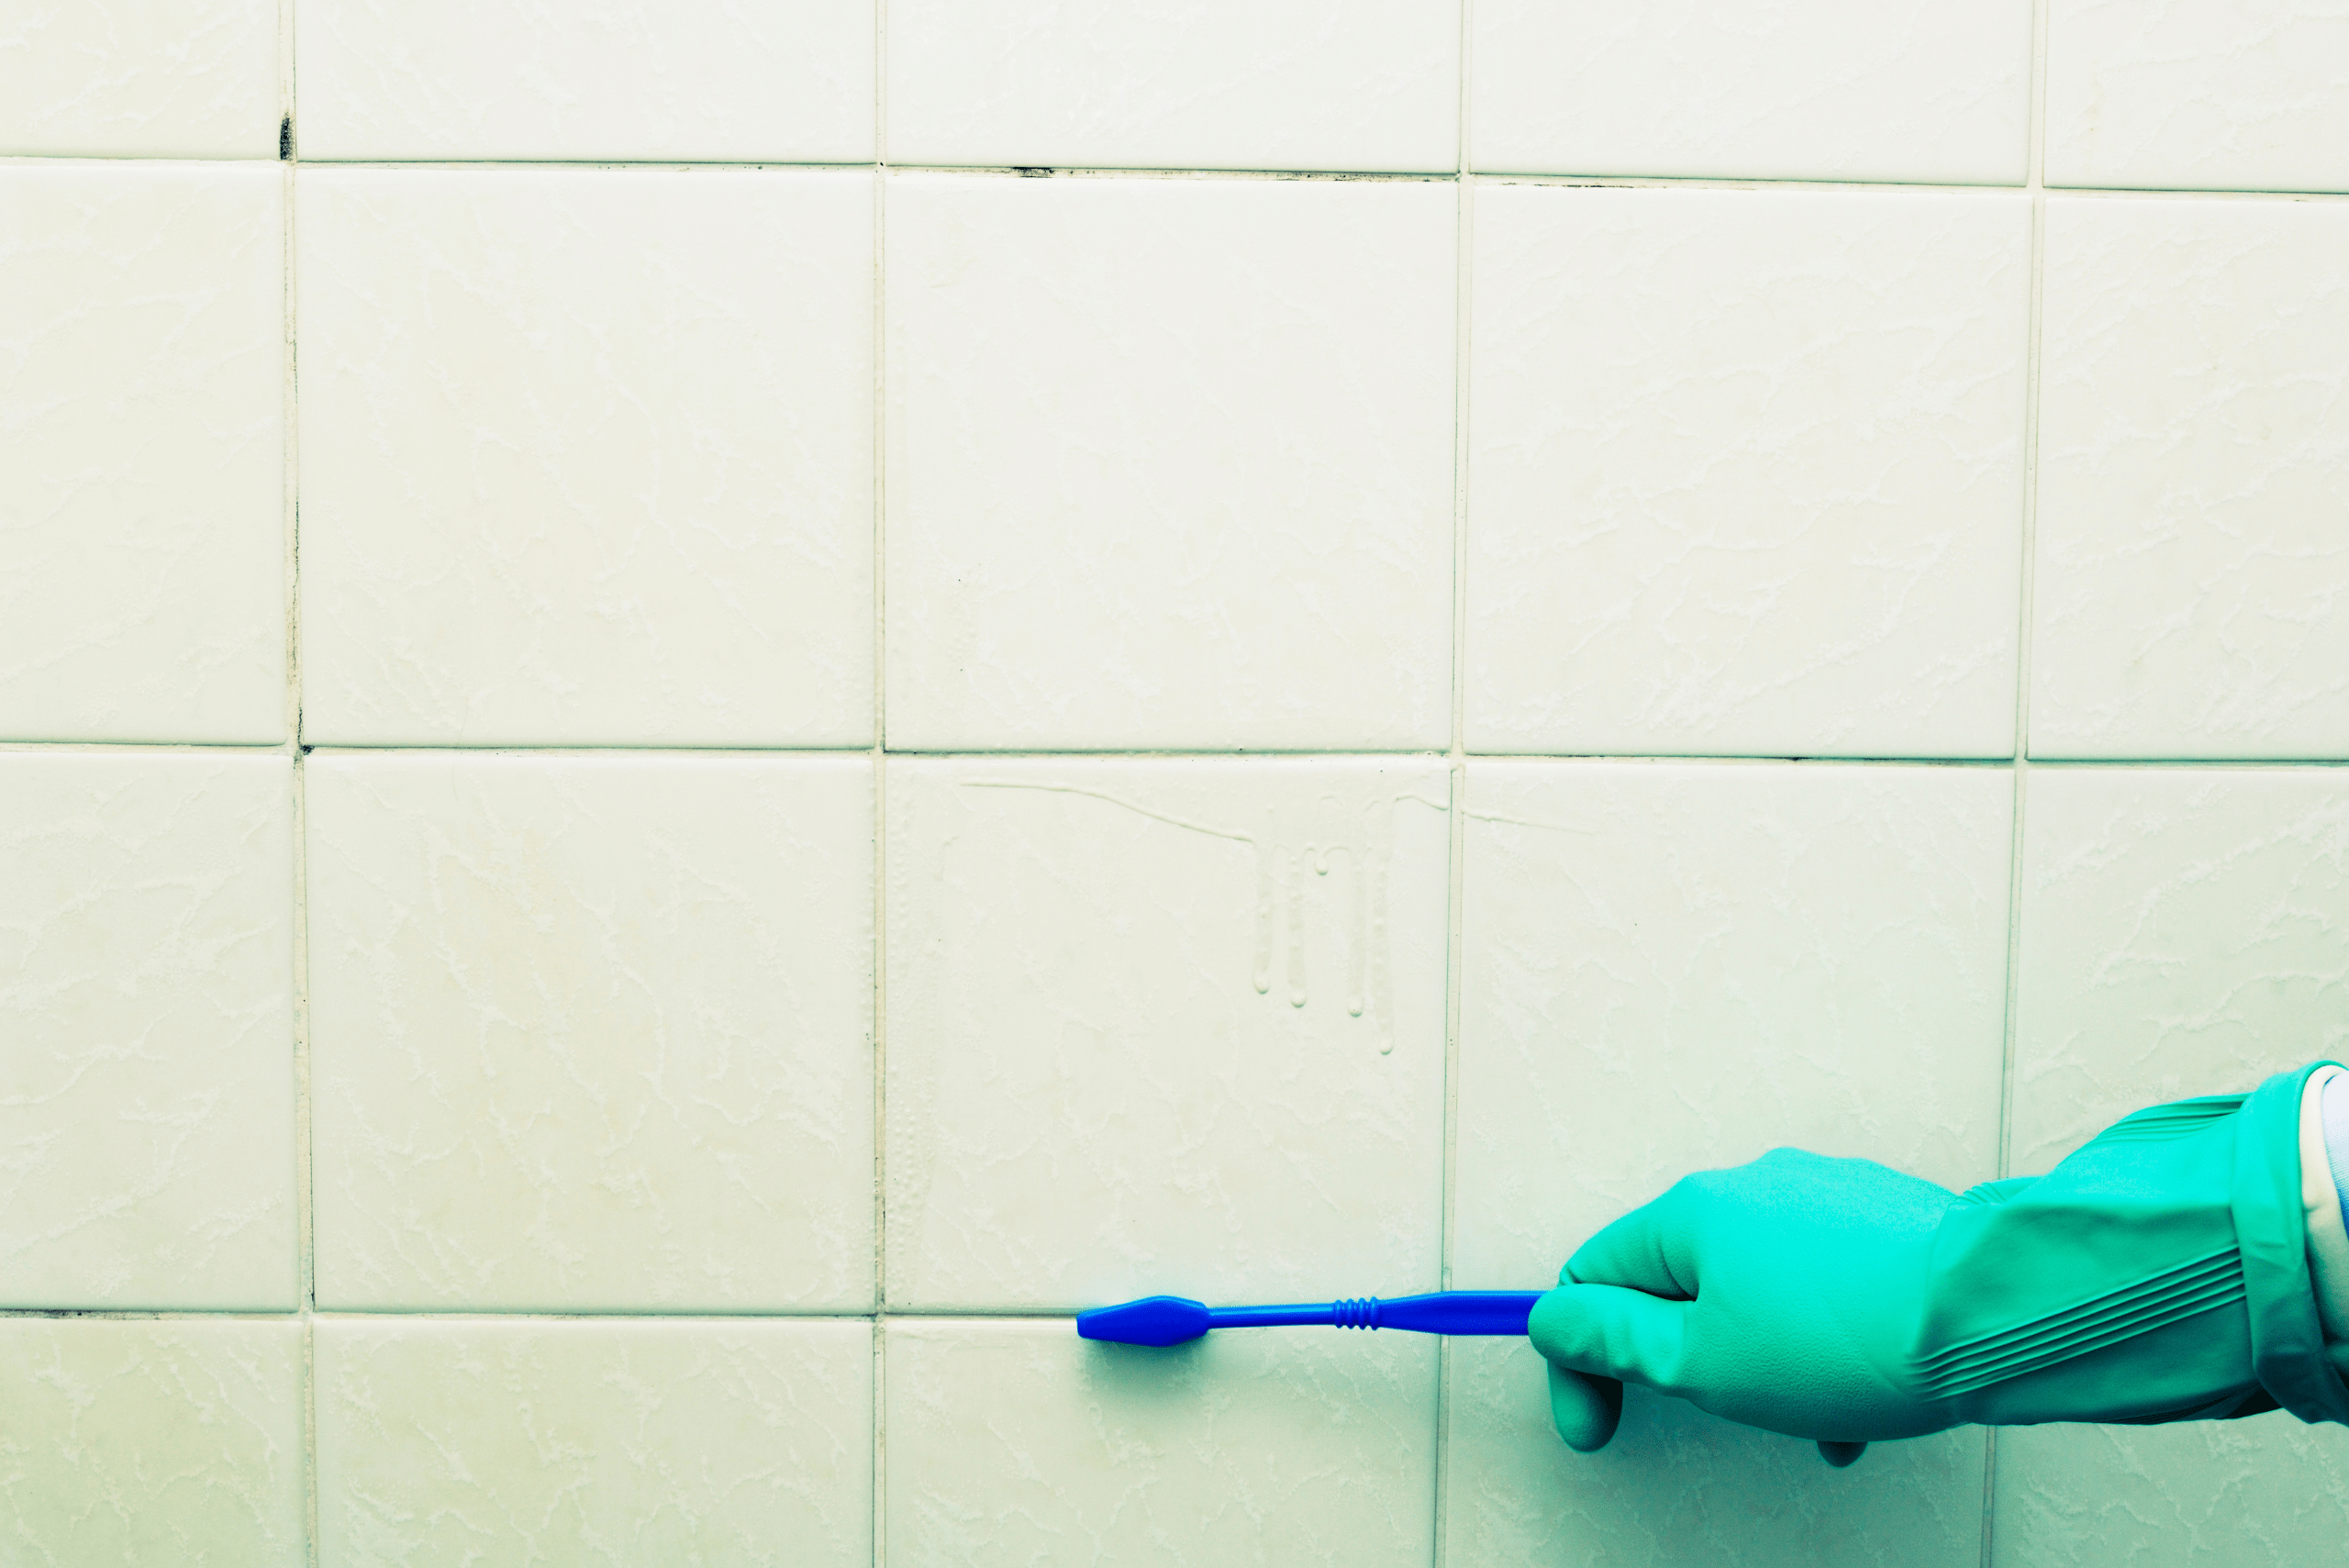 A hand wearing glove using a toothbrush to clean grout.